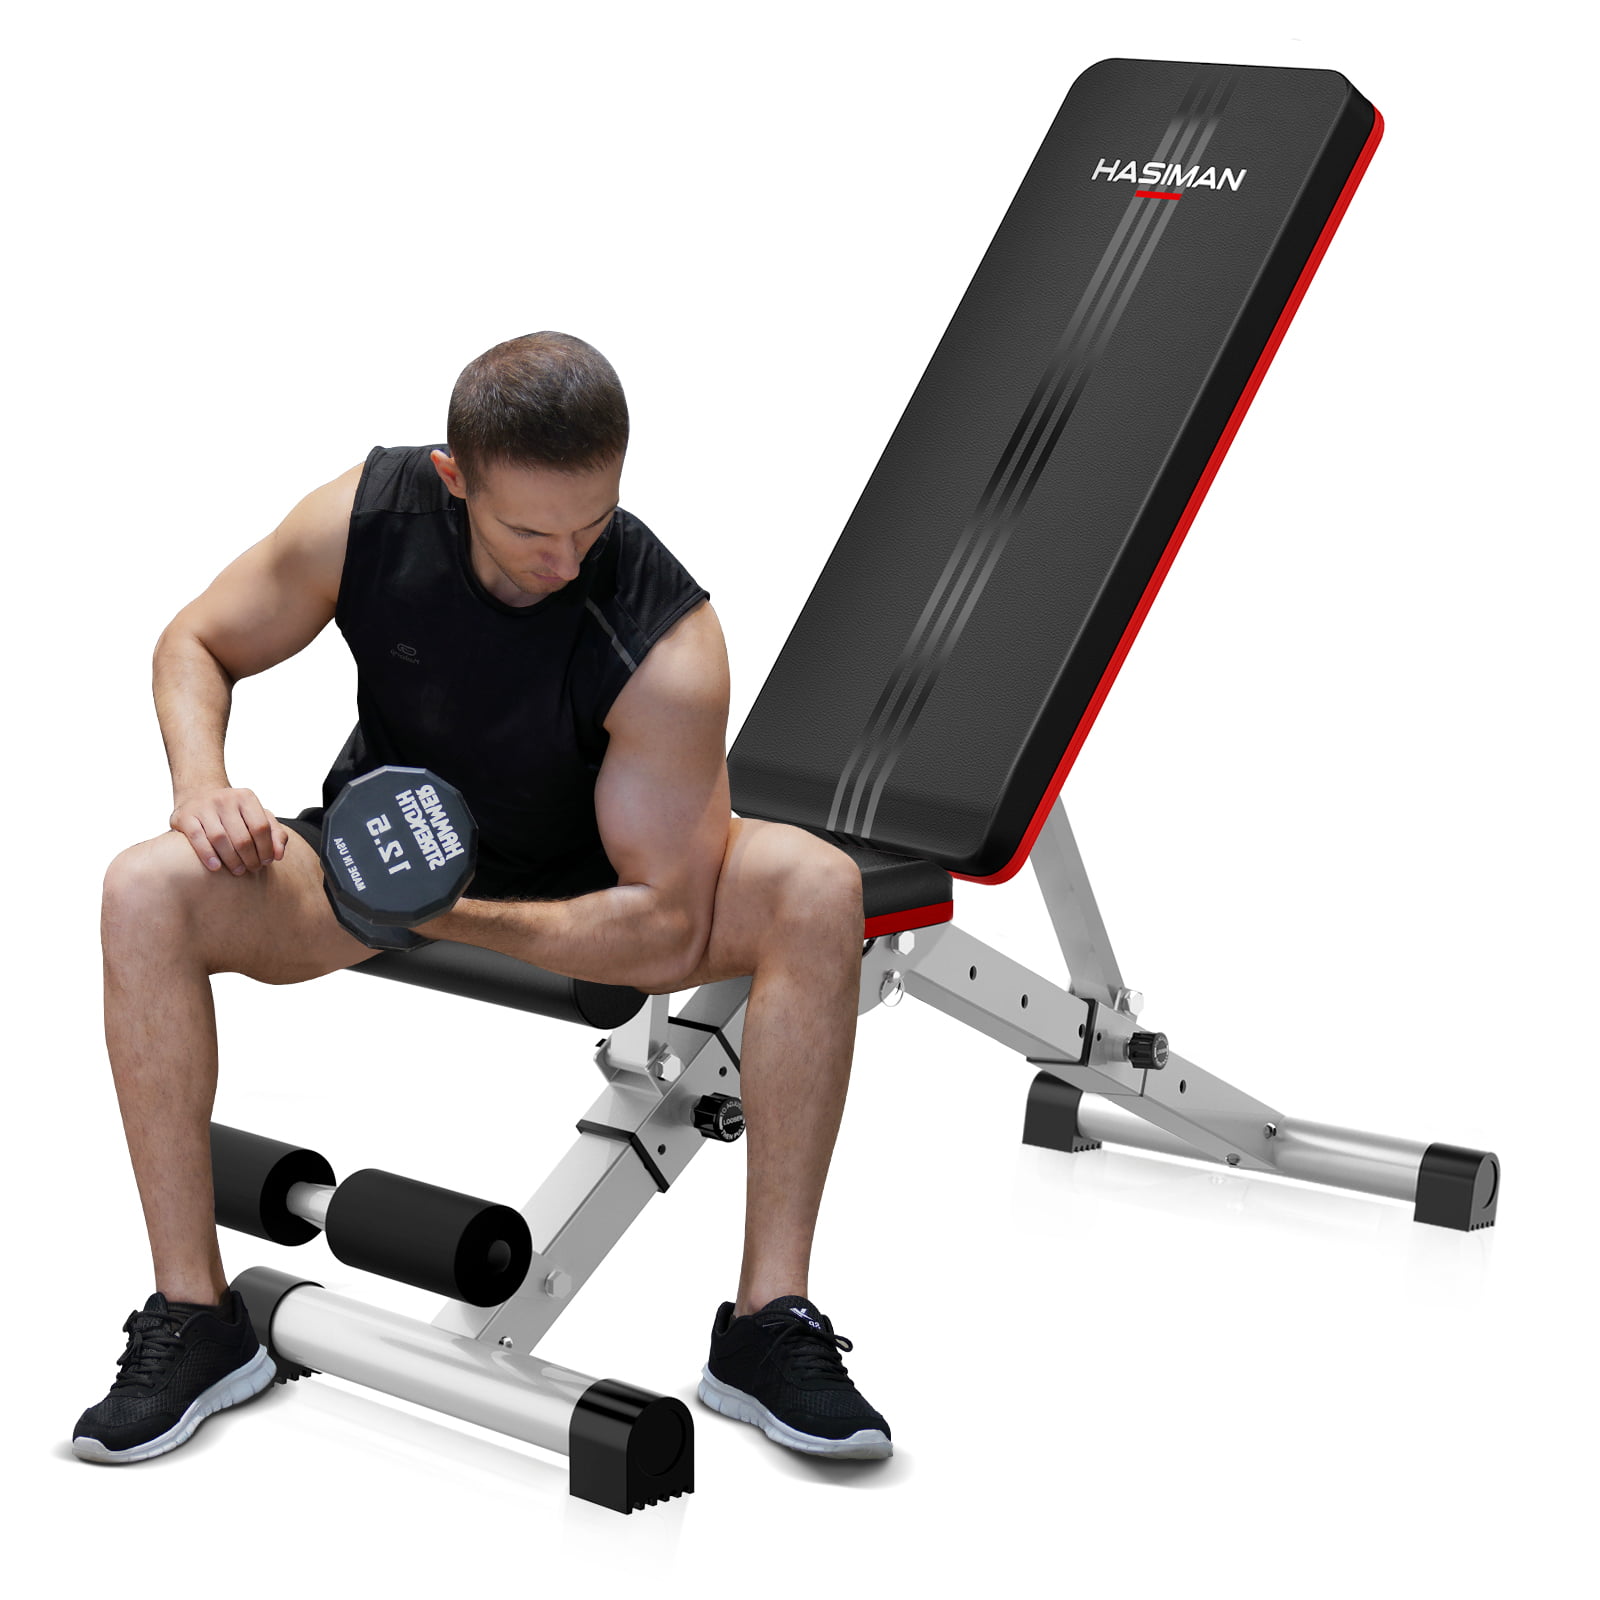 3-in-1 Adjustable Weight Bench for Full Body Exercise Fitness Home Gym Workout 7 4 +3 Levels Foldable Exercise Bench Sit Up Bench